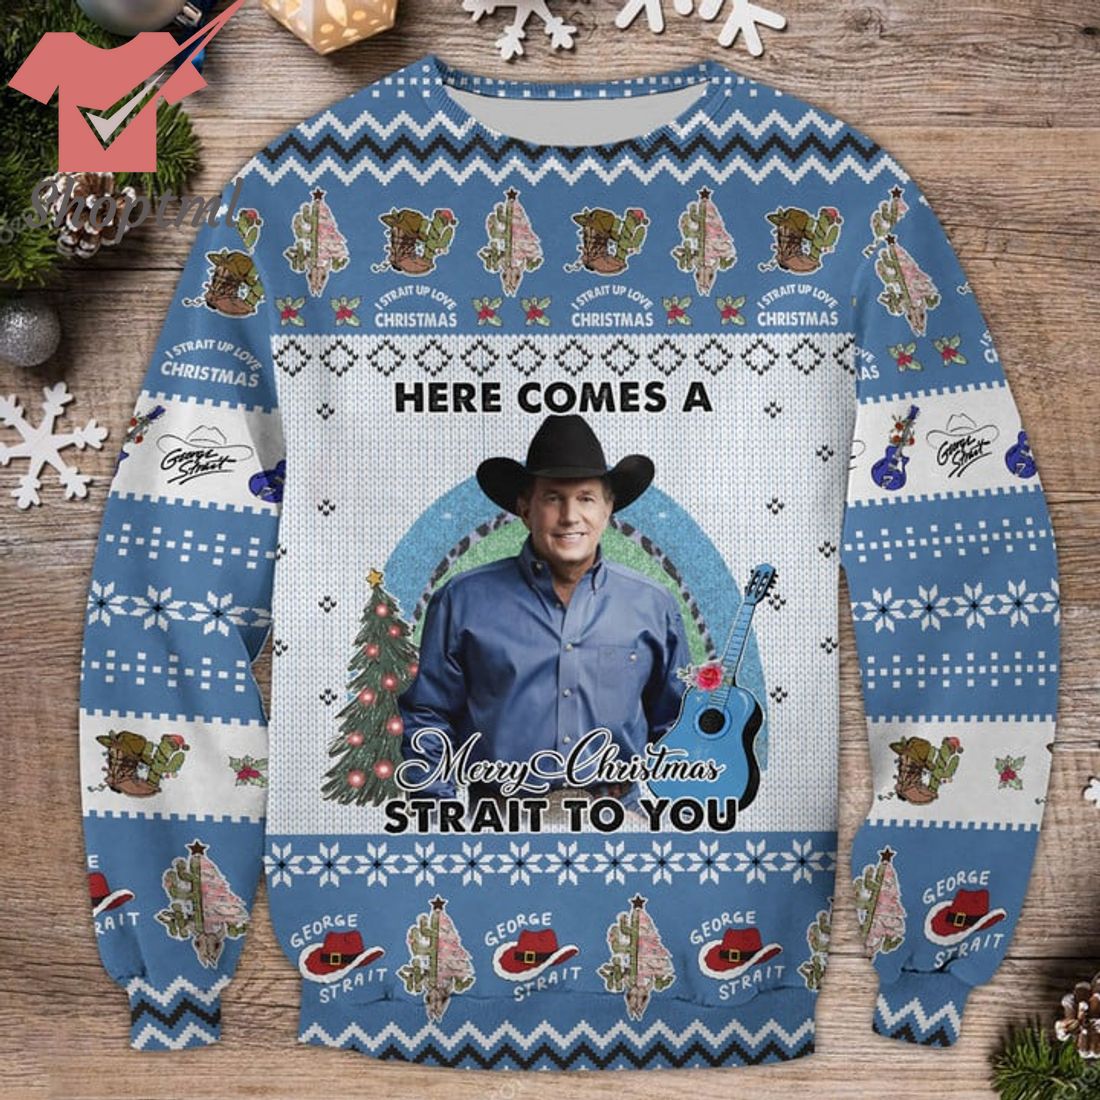 Geogre Strait here comes a merry christmas strait to you ugly chrismas sweater